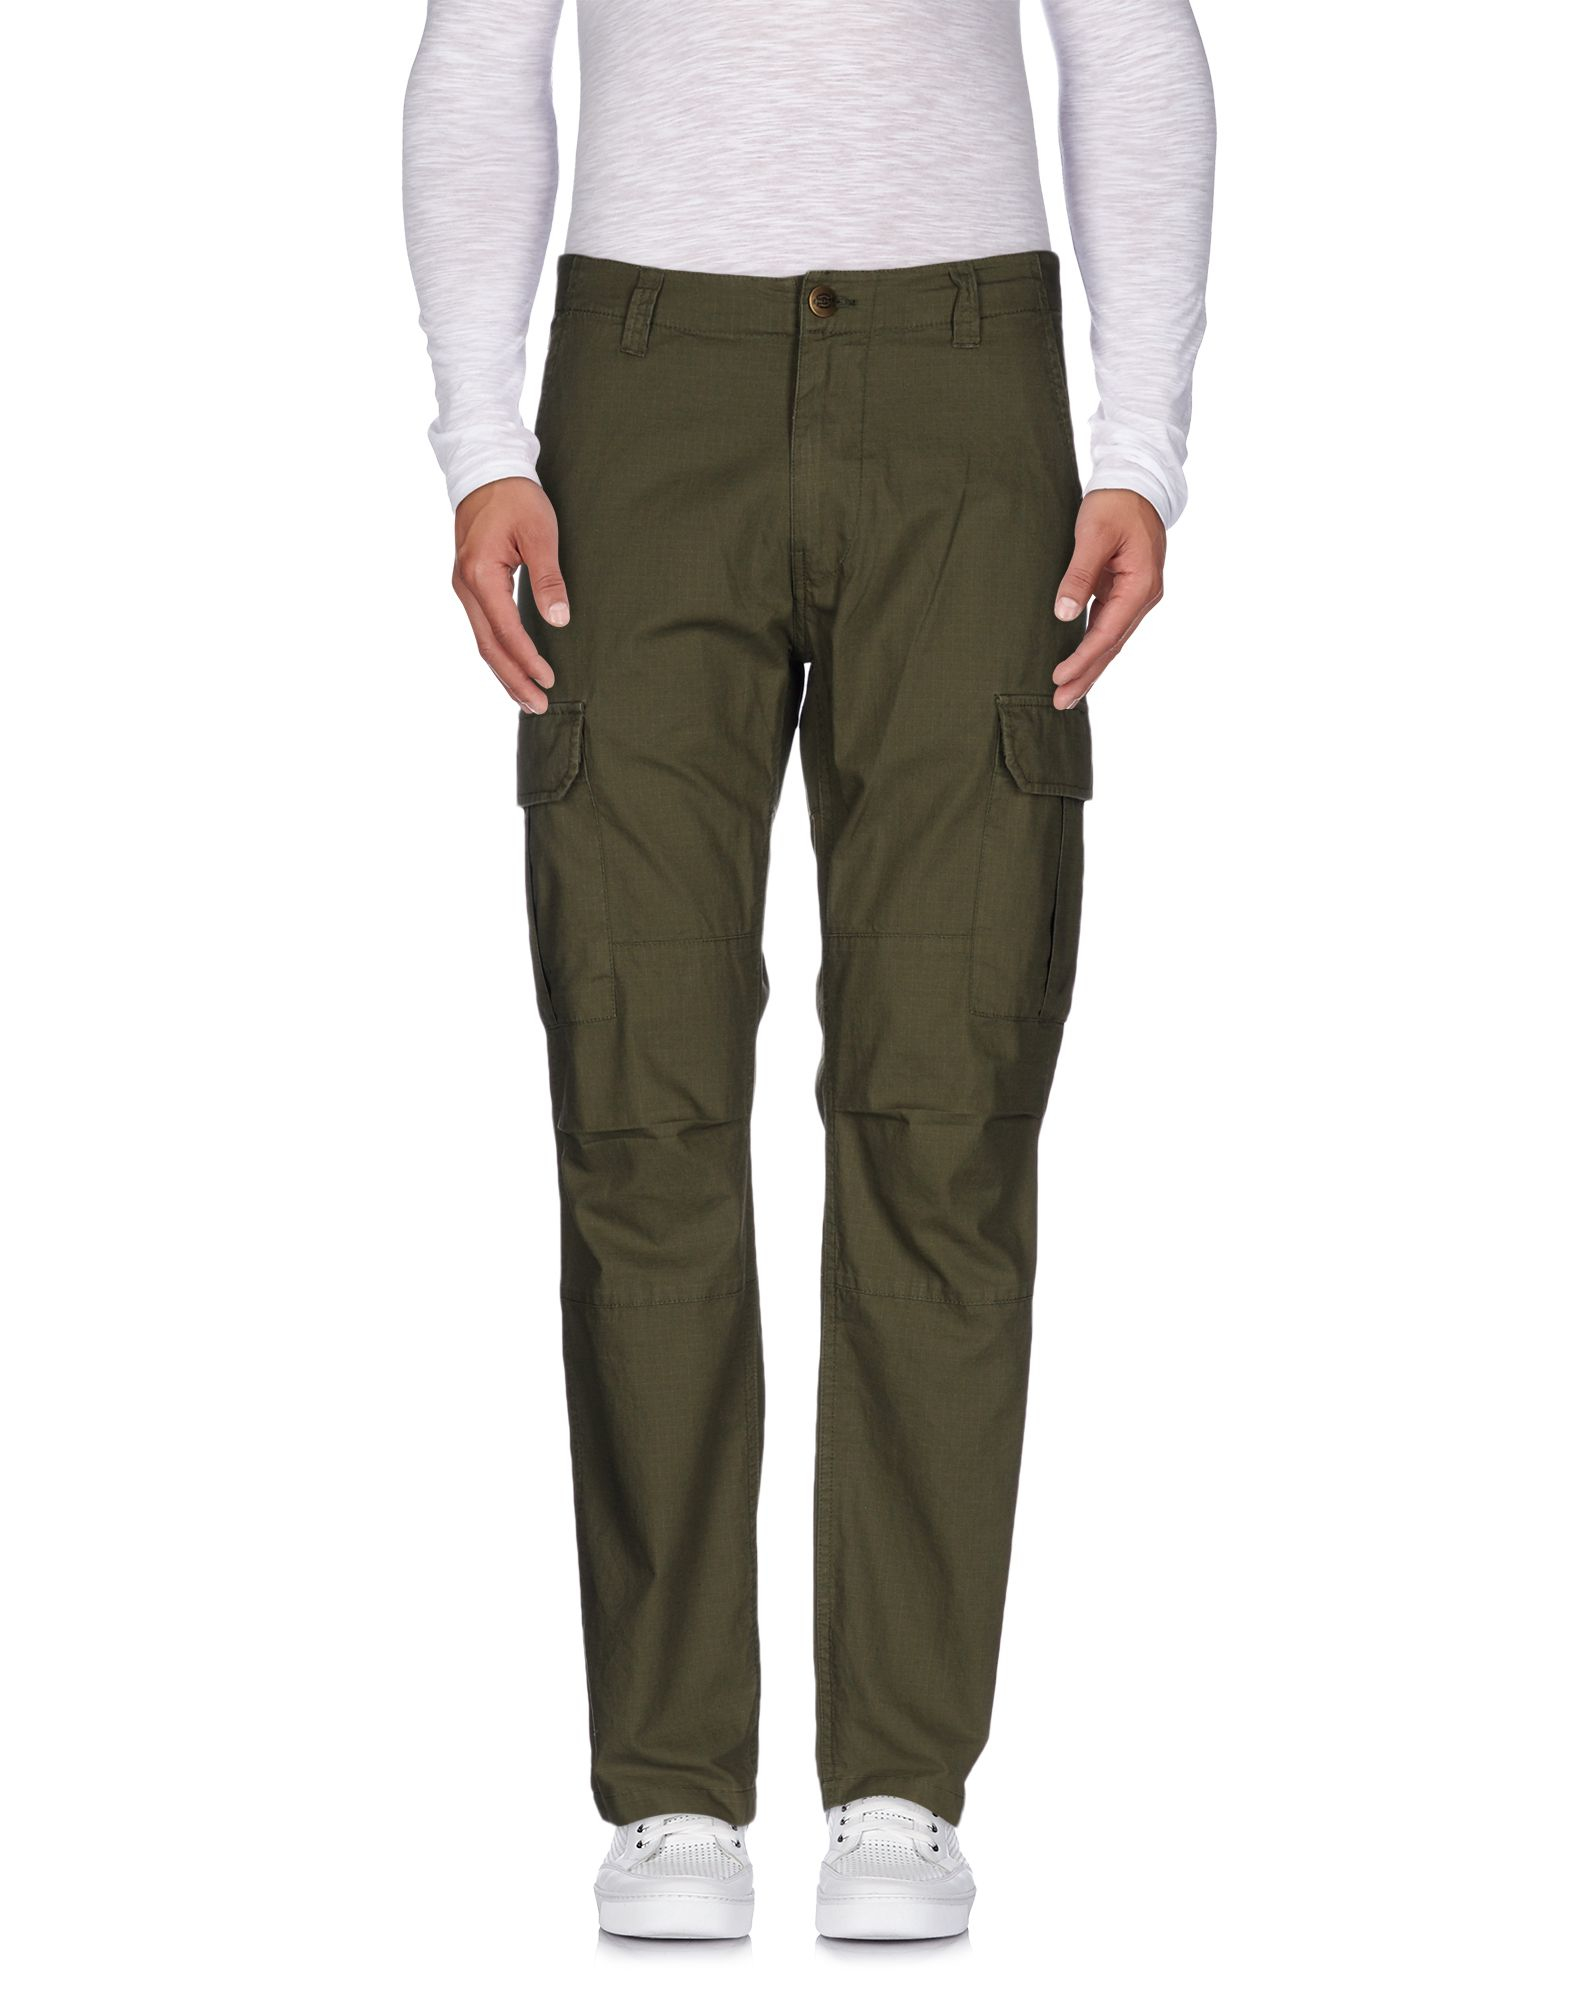 Dickies Cotton Casual Trouser in Military Green (Green) for Men - Lyst